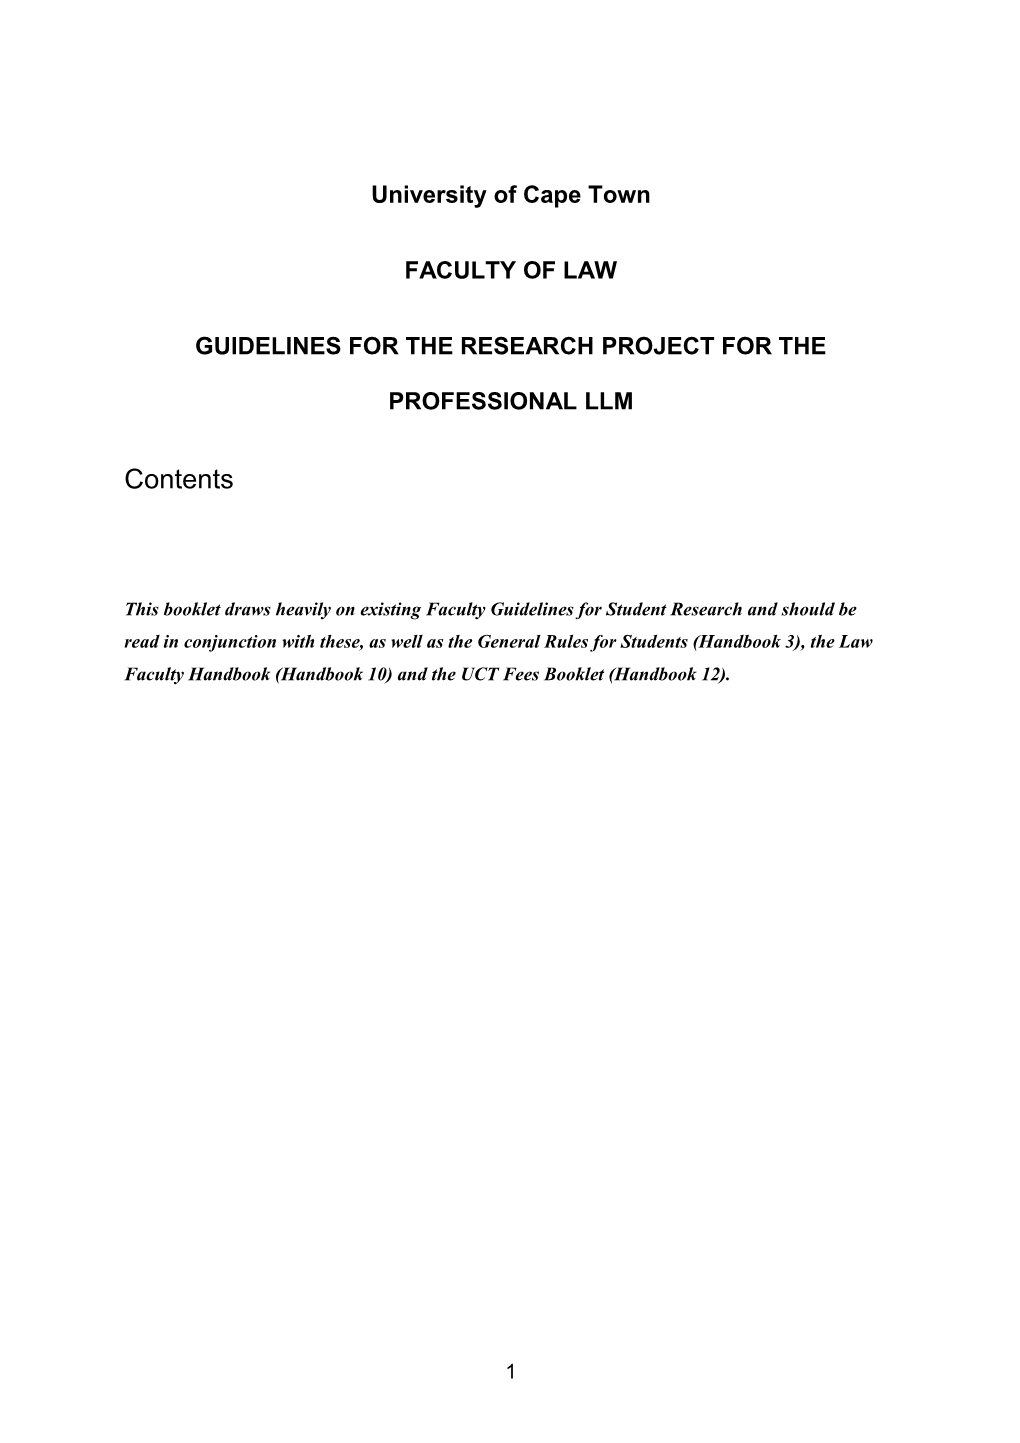 Guidelines for the Research Project for the Professional Llm